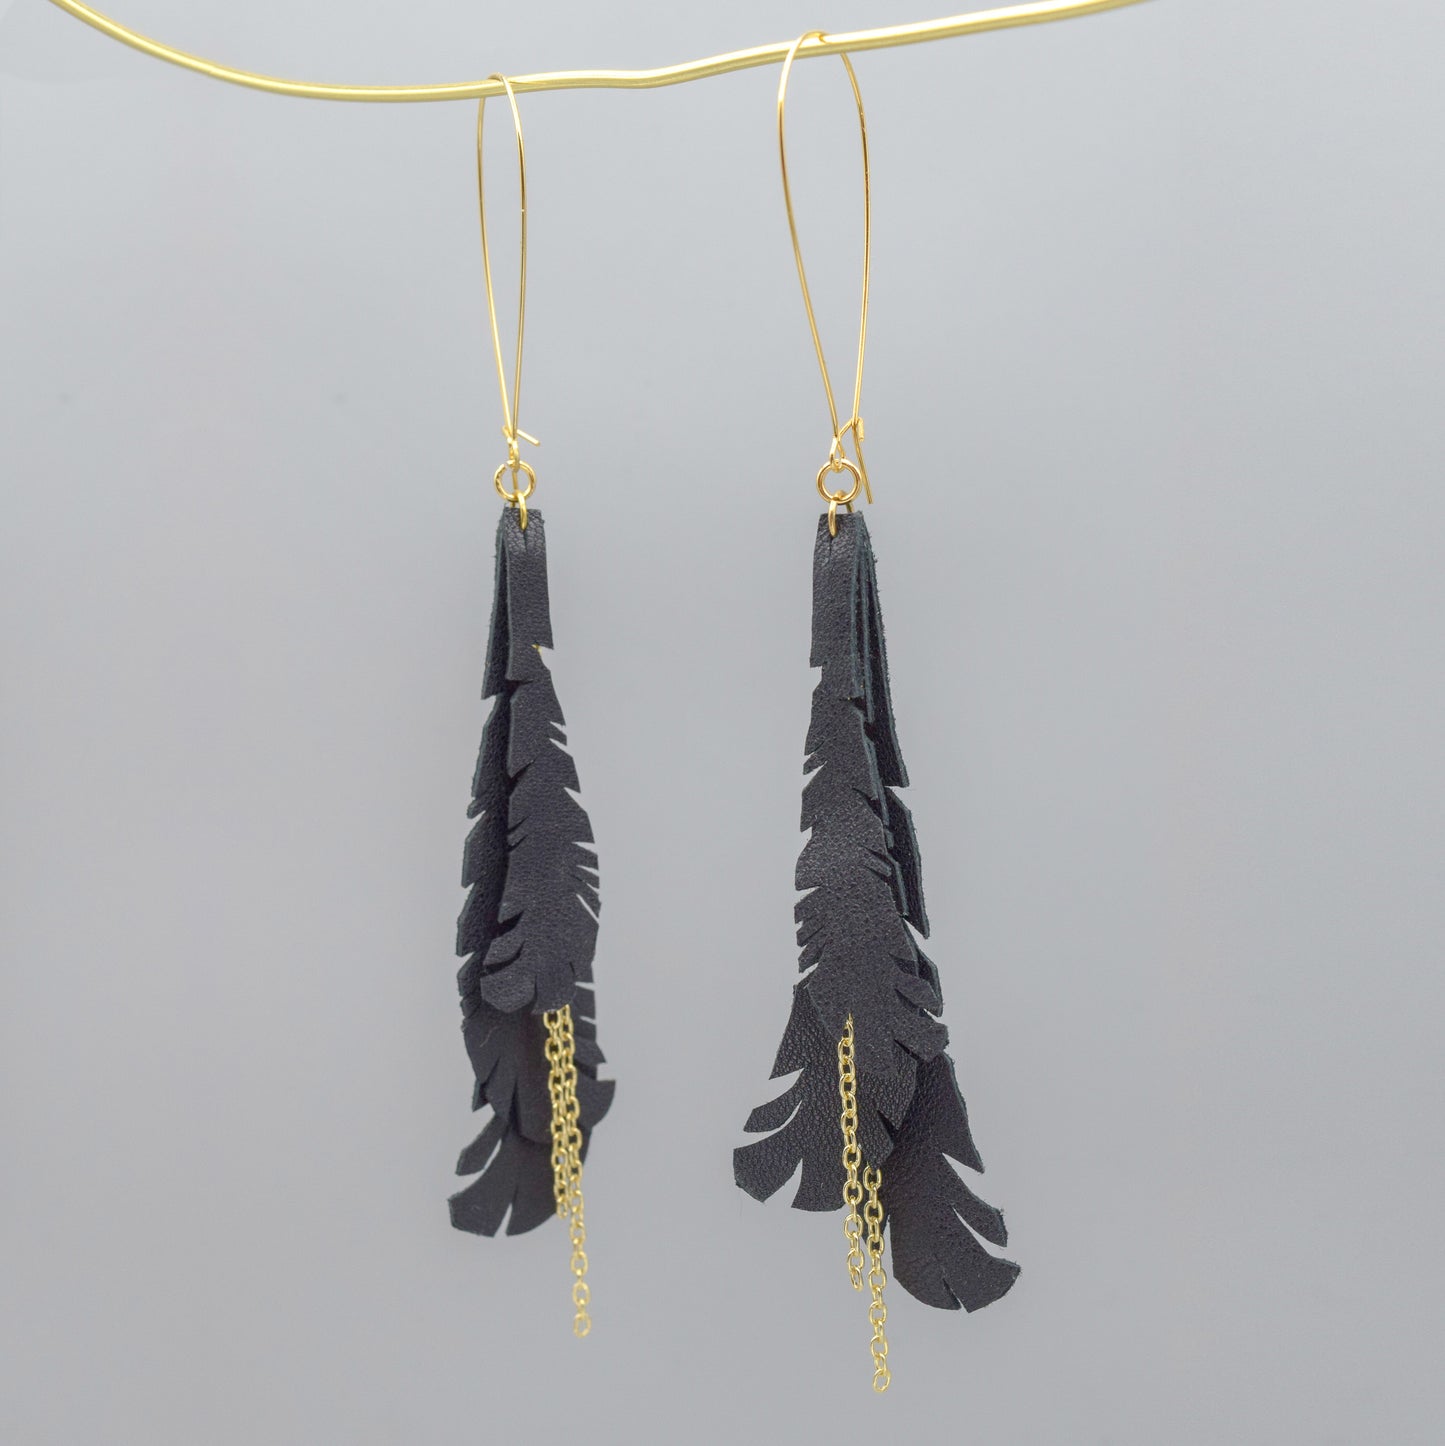 Black Feather Leather Earrings with Gold Chain Detail